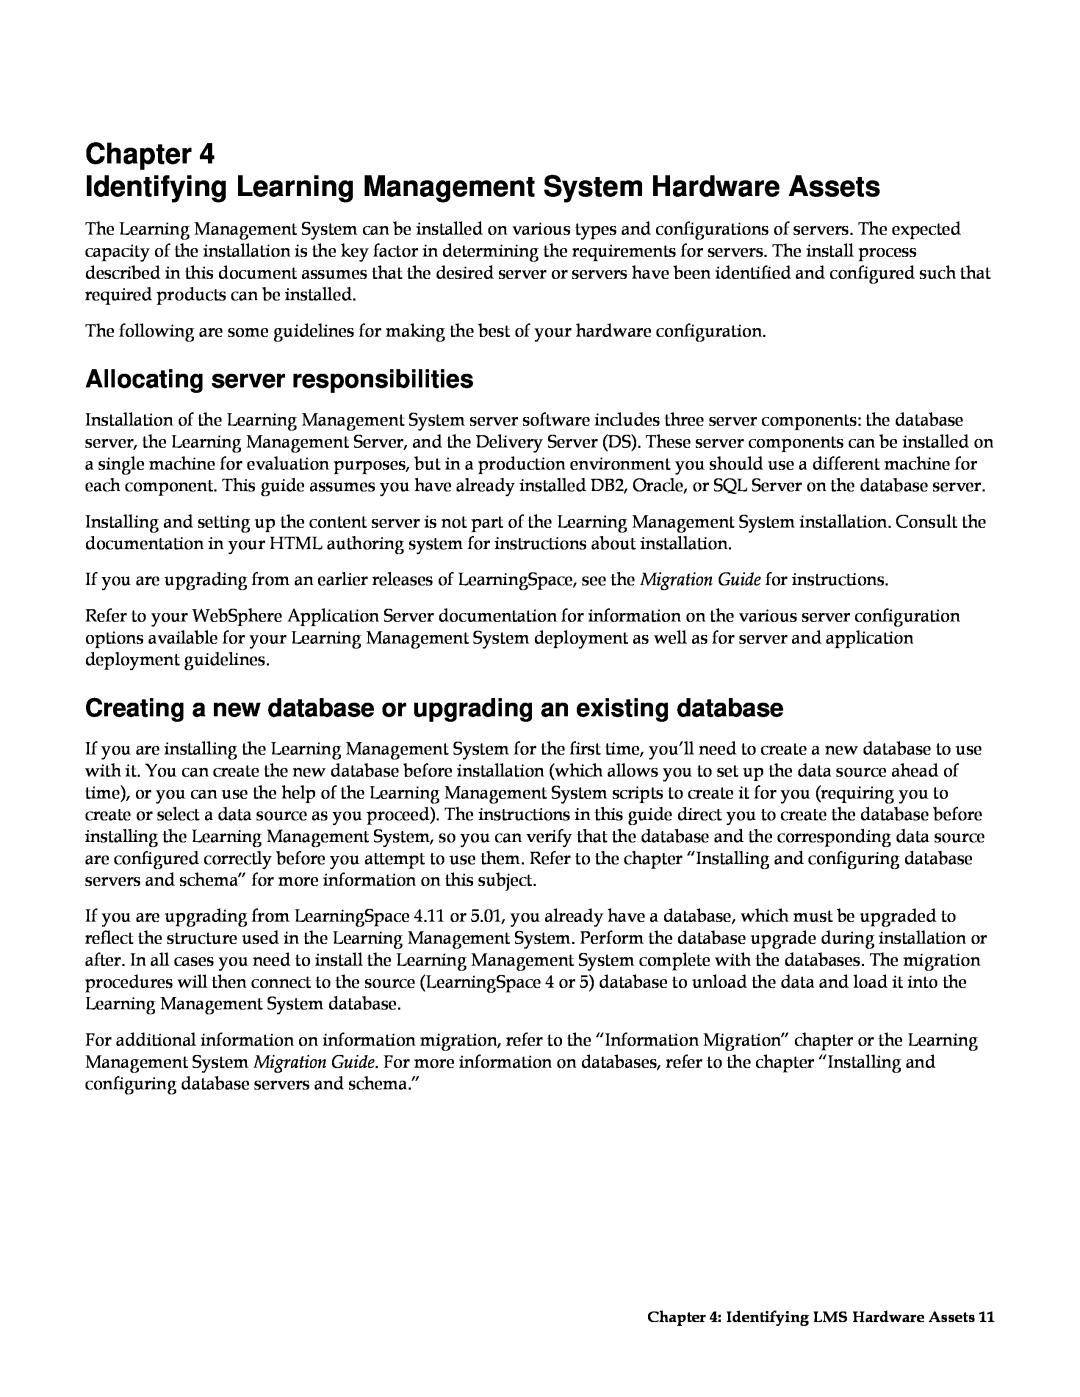 IBM G210-1784-00 manual Chapter Identifying Learning Management System Hardware Assets, Allocating server responsibilities 